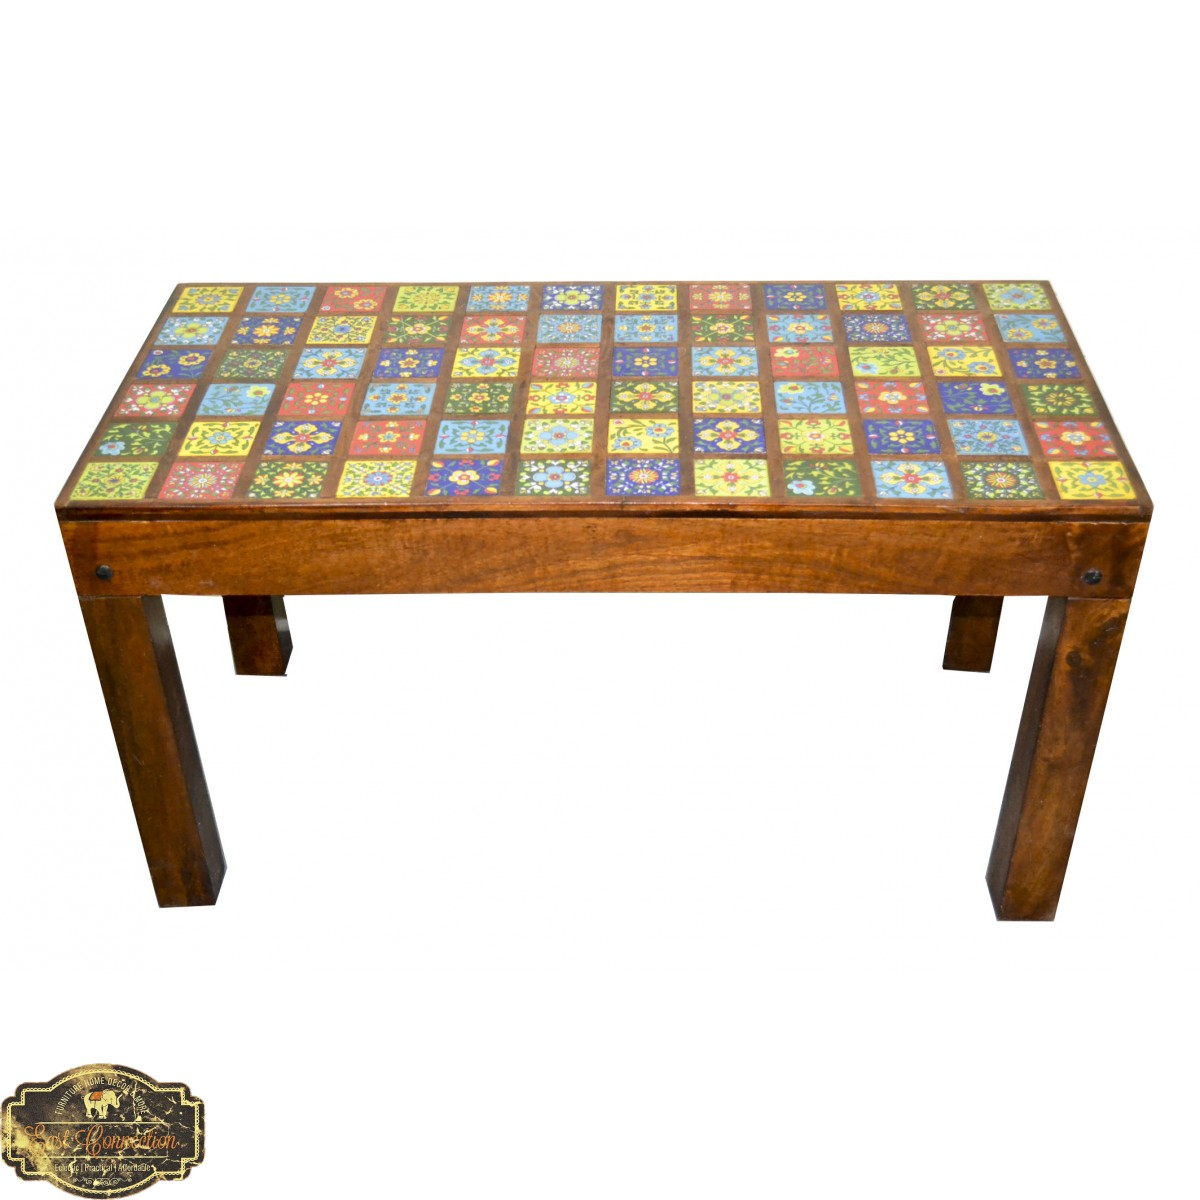 Moroccan Tile Coffee Table intended for size 1200 X 1200